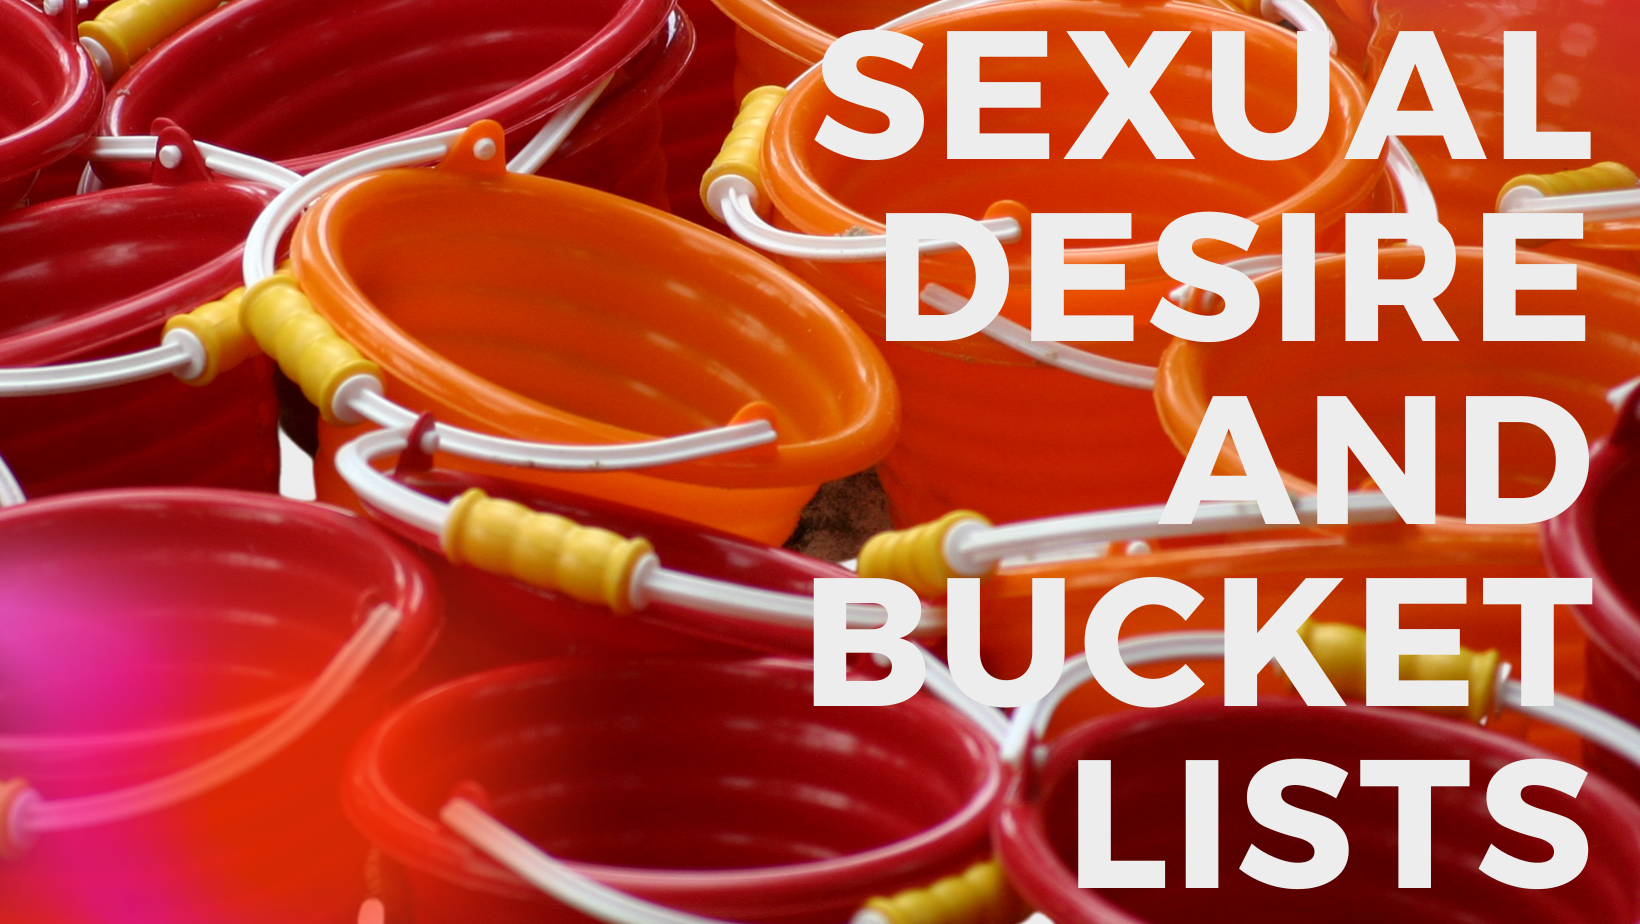 Sexual Desire and bucket lists